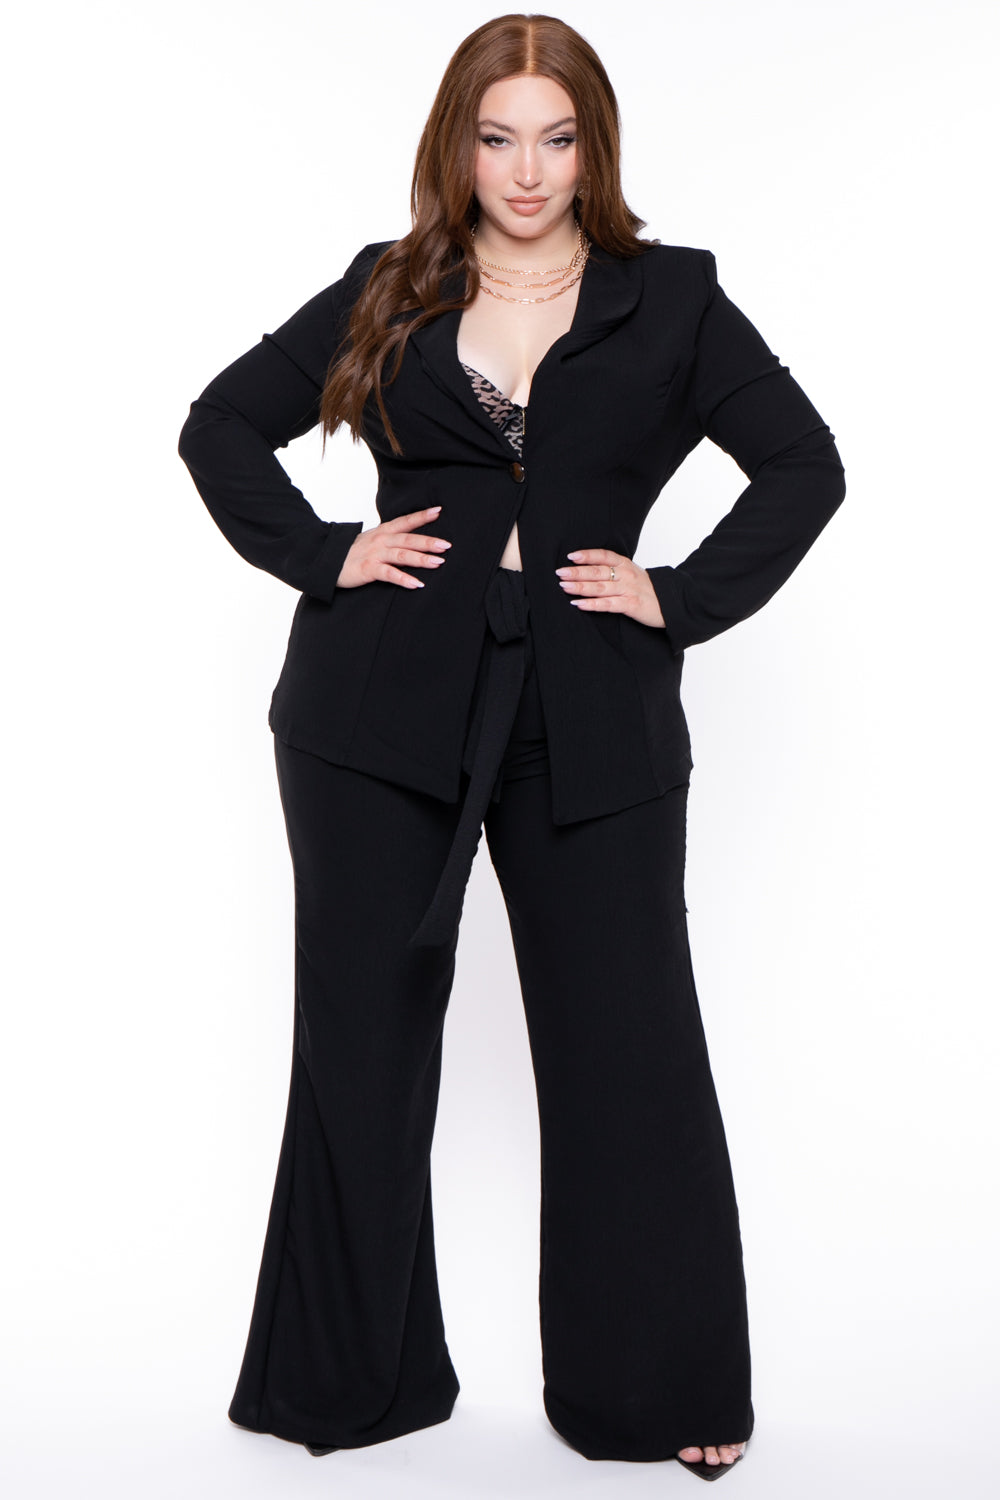 Plus Size Formal Pant Suits and Plus Size Cocktail Pants Suits are a great  option if you need to go to…